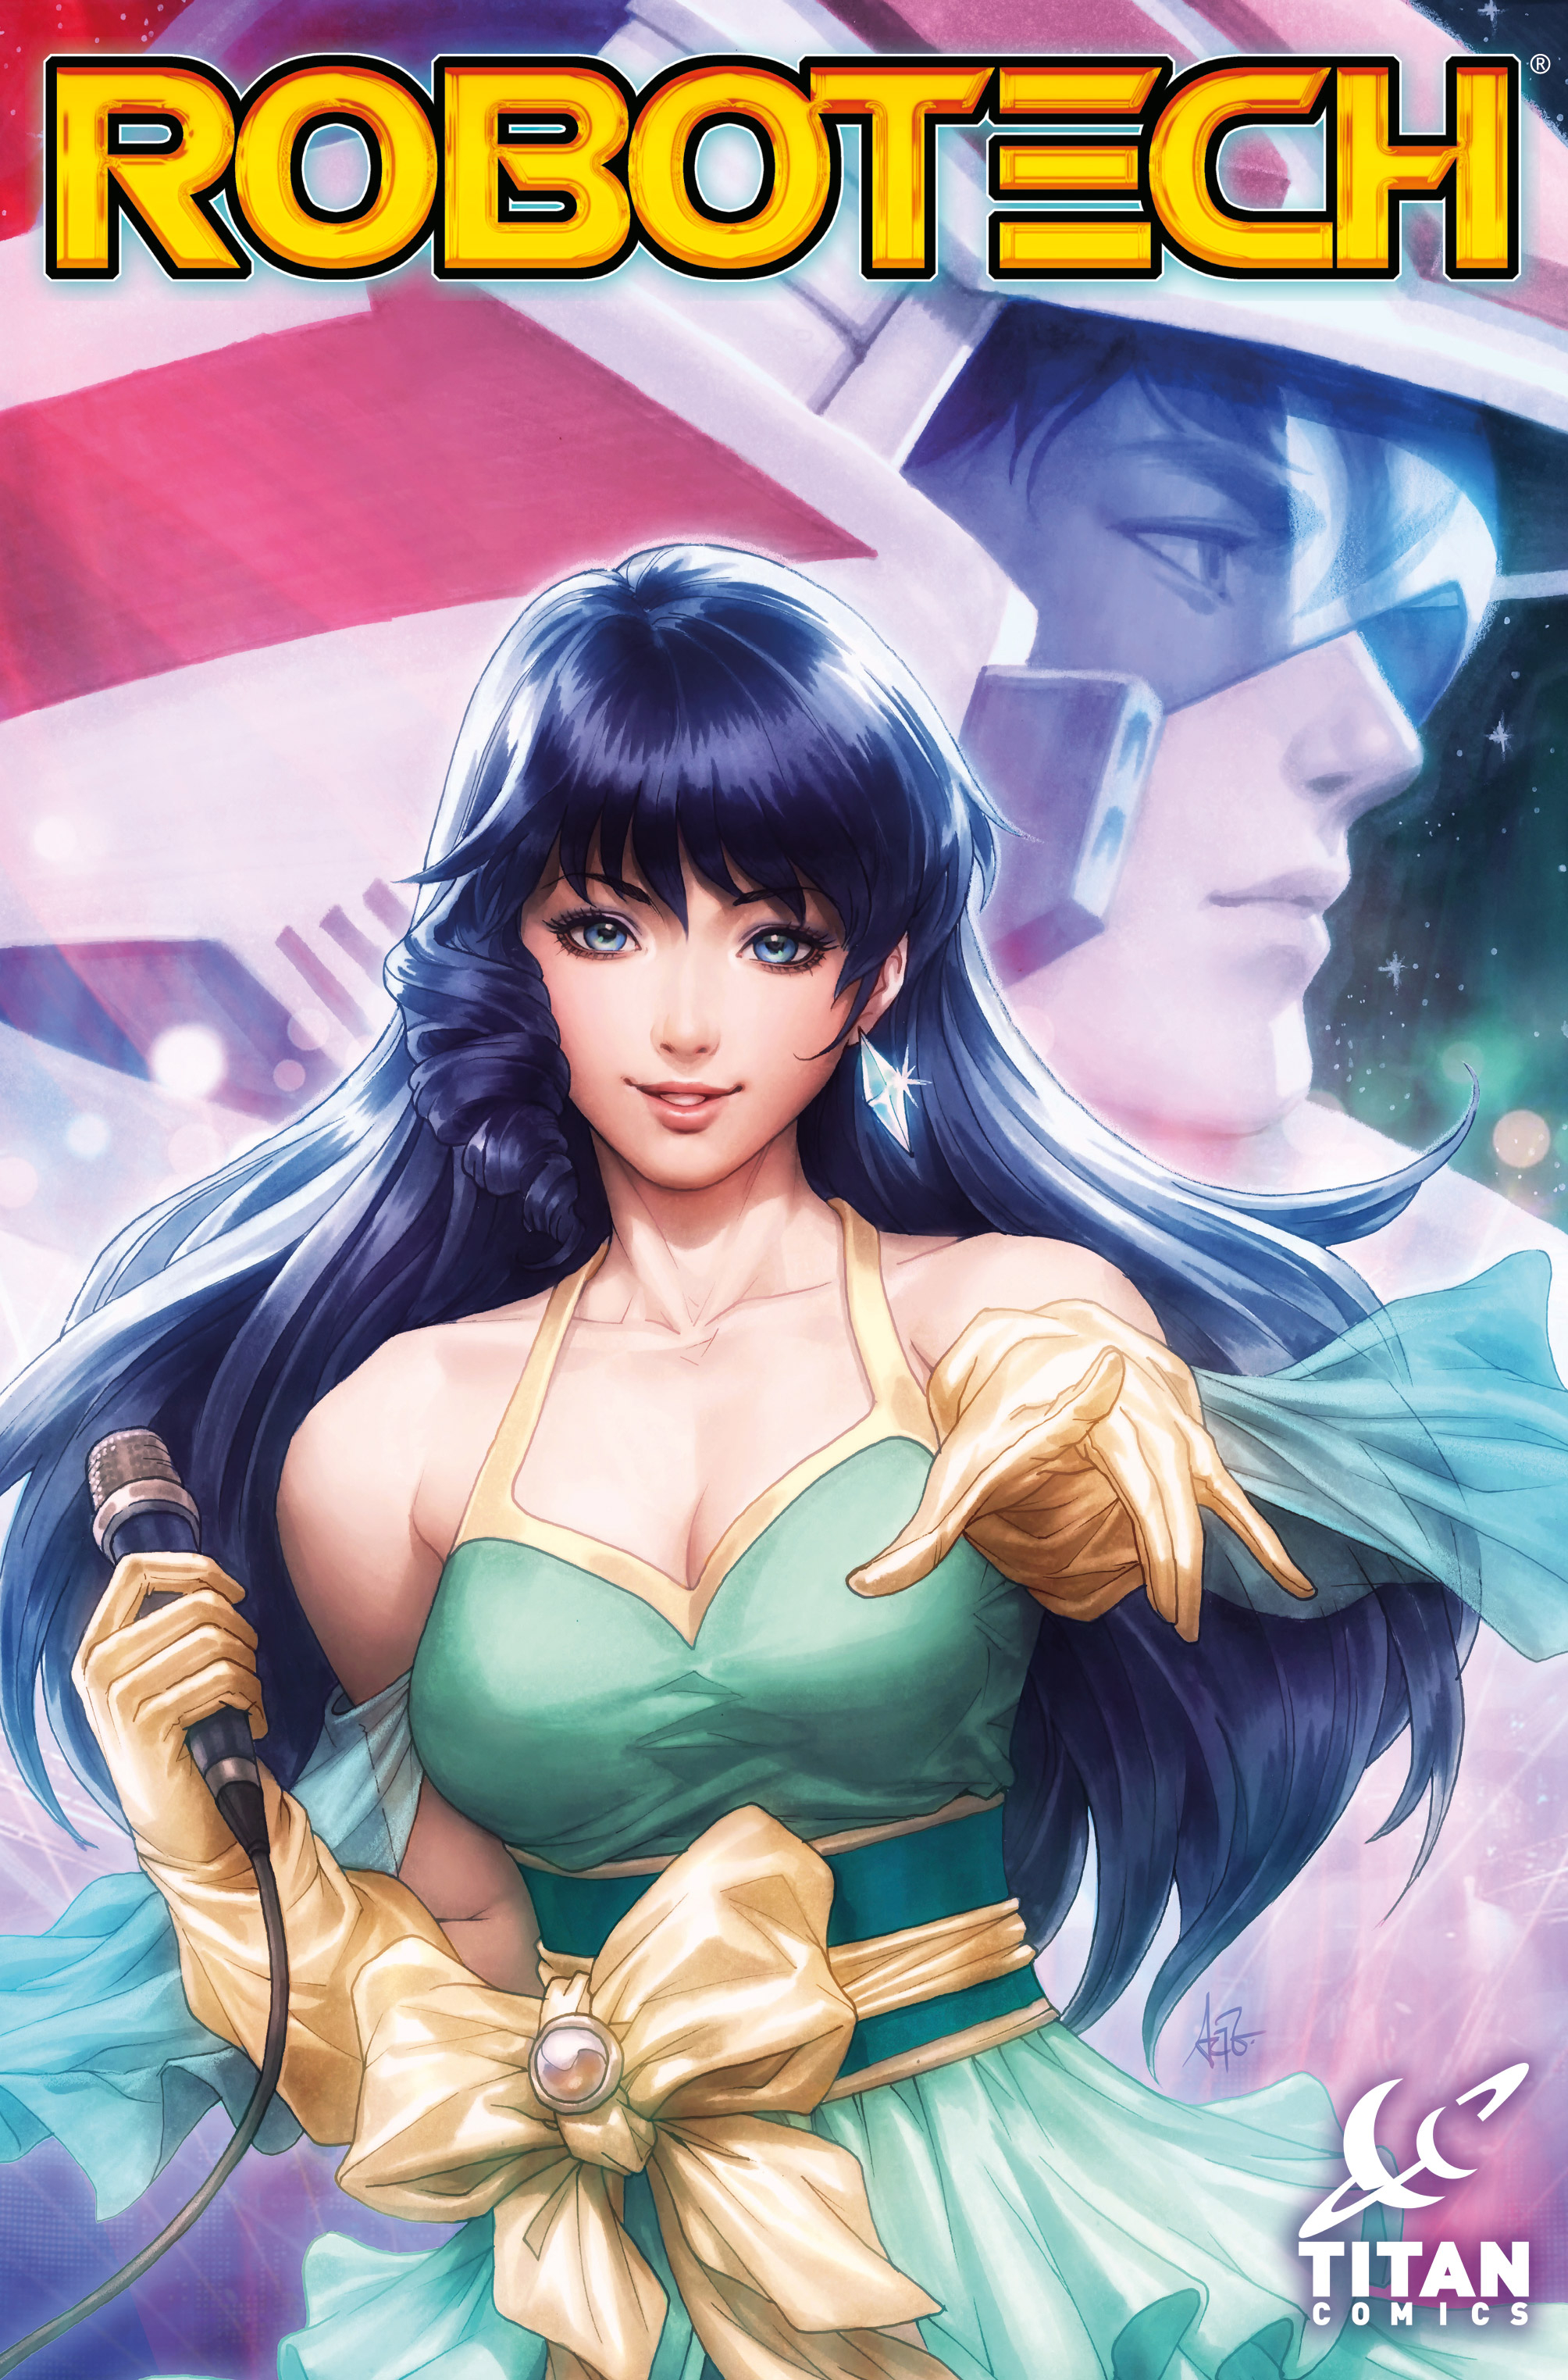 Robotech #1 Cover Featuring Lynn Minmei Revealed at ComicsPRO 2017